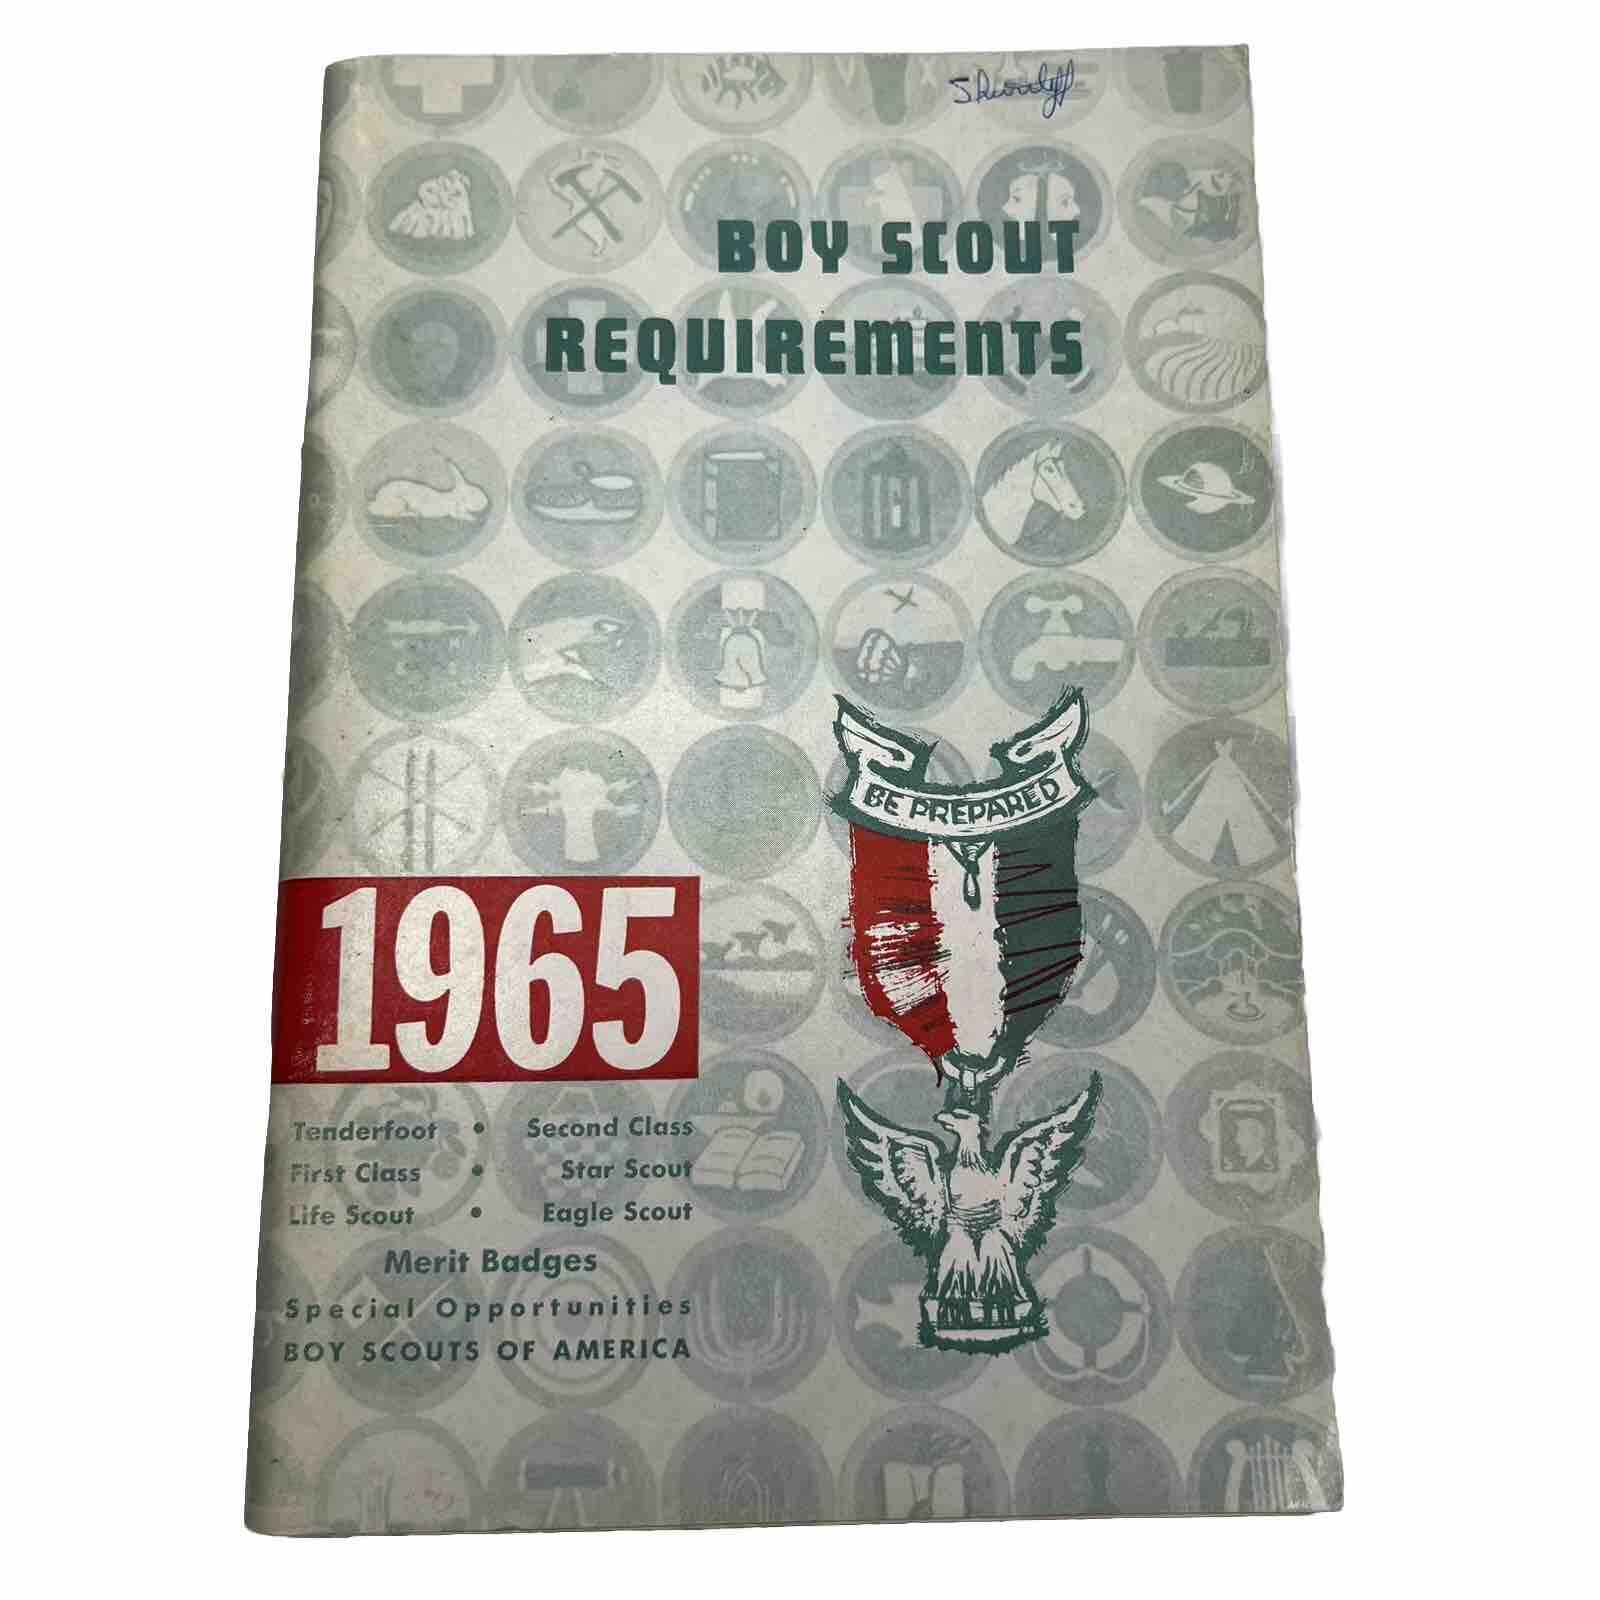 BSA Boy Scout Requirements 1965 Revision Paperback BS-991